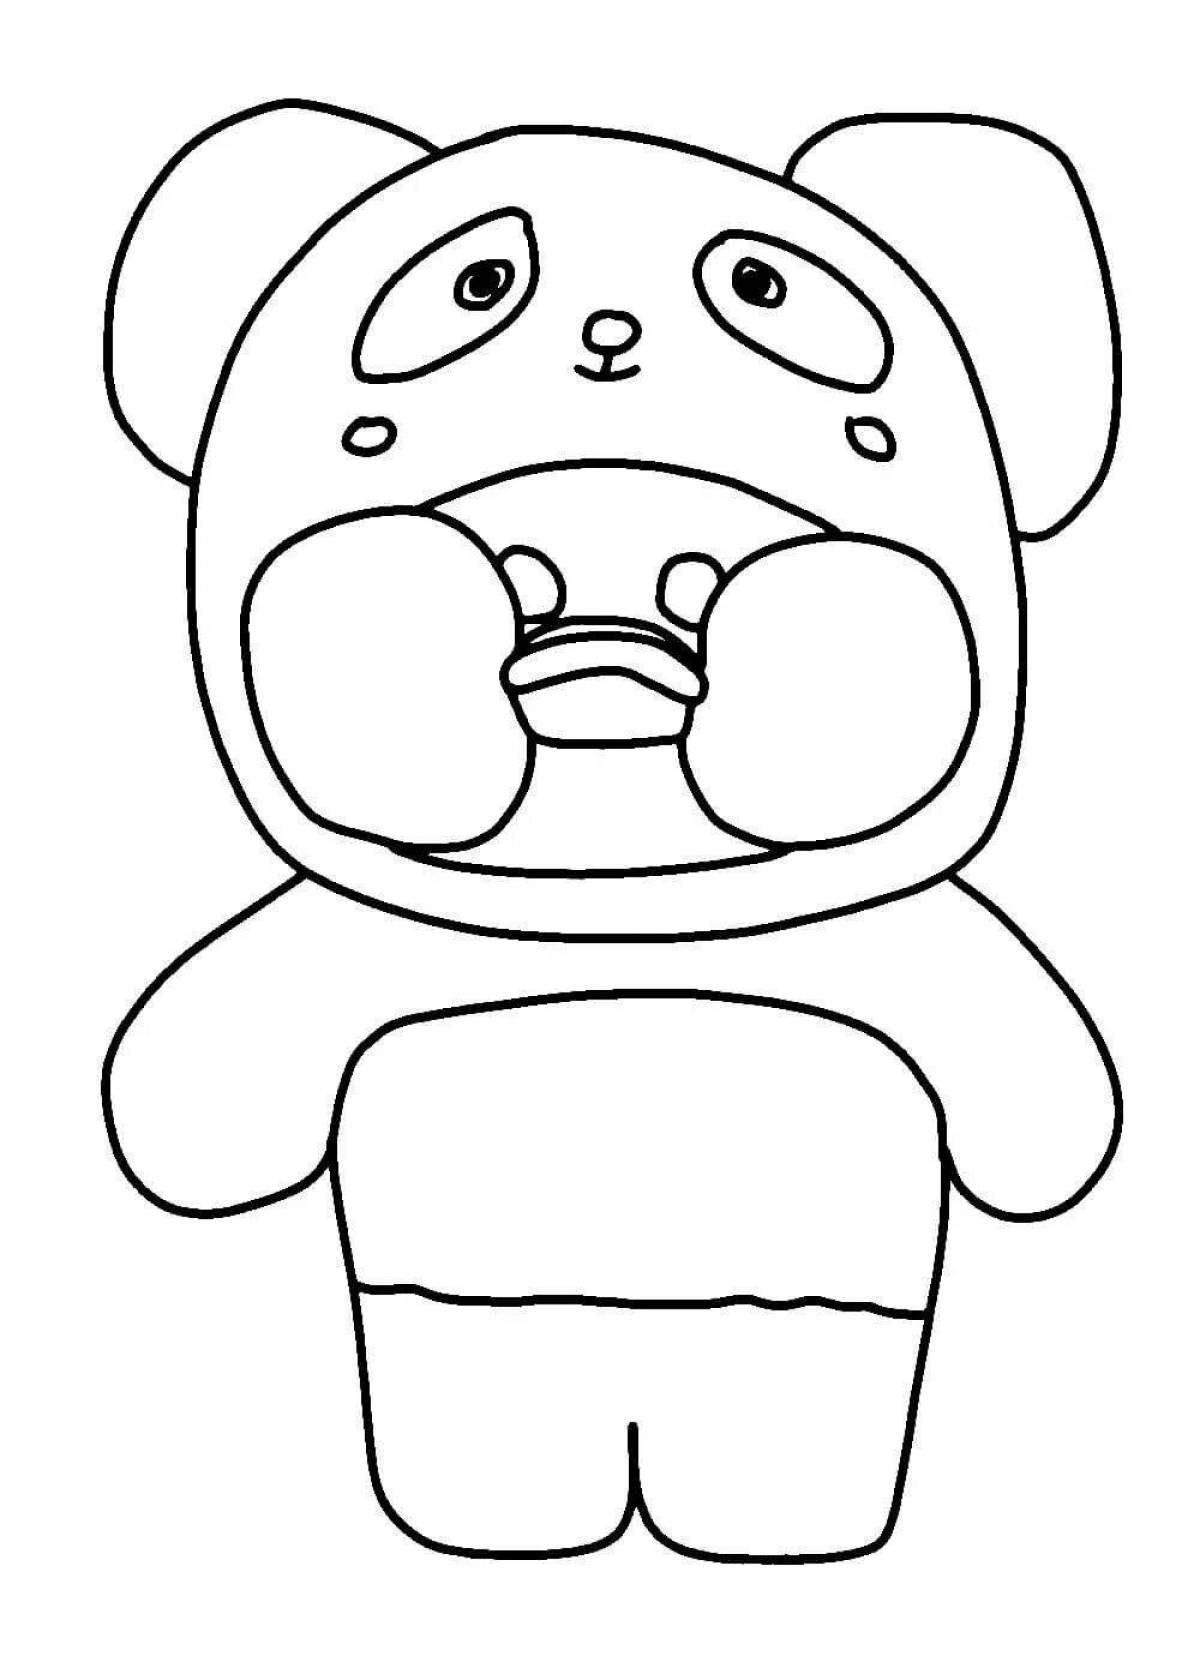 Lalafanfan coloring page with a playful duck